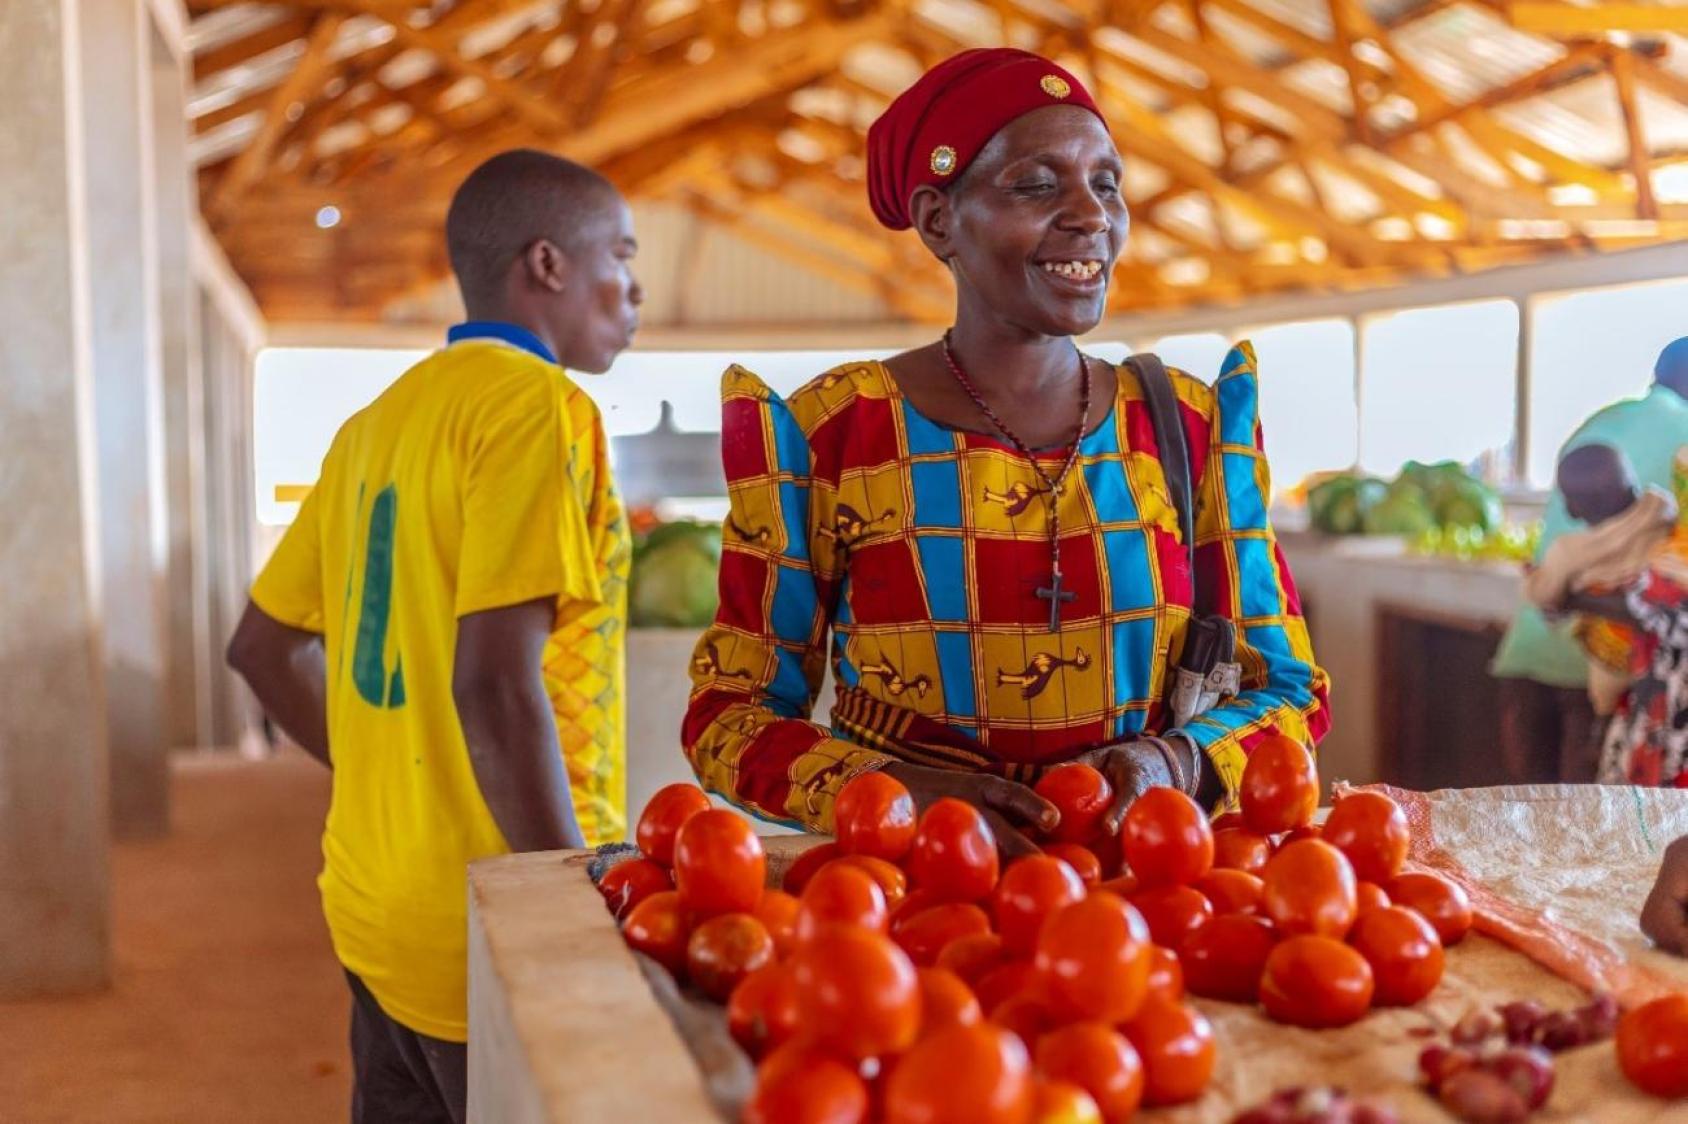 A woman in a red dress and headscarf and a man in a yellow sports jersey stand behind a makeshift stand with tomatoes